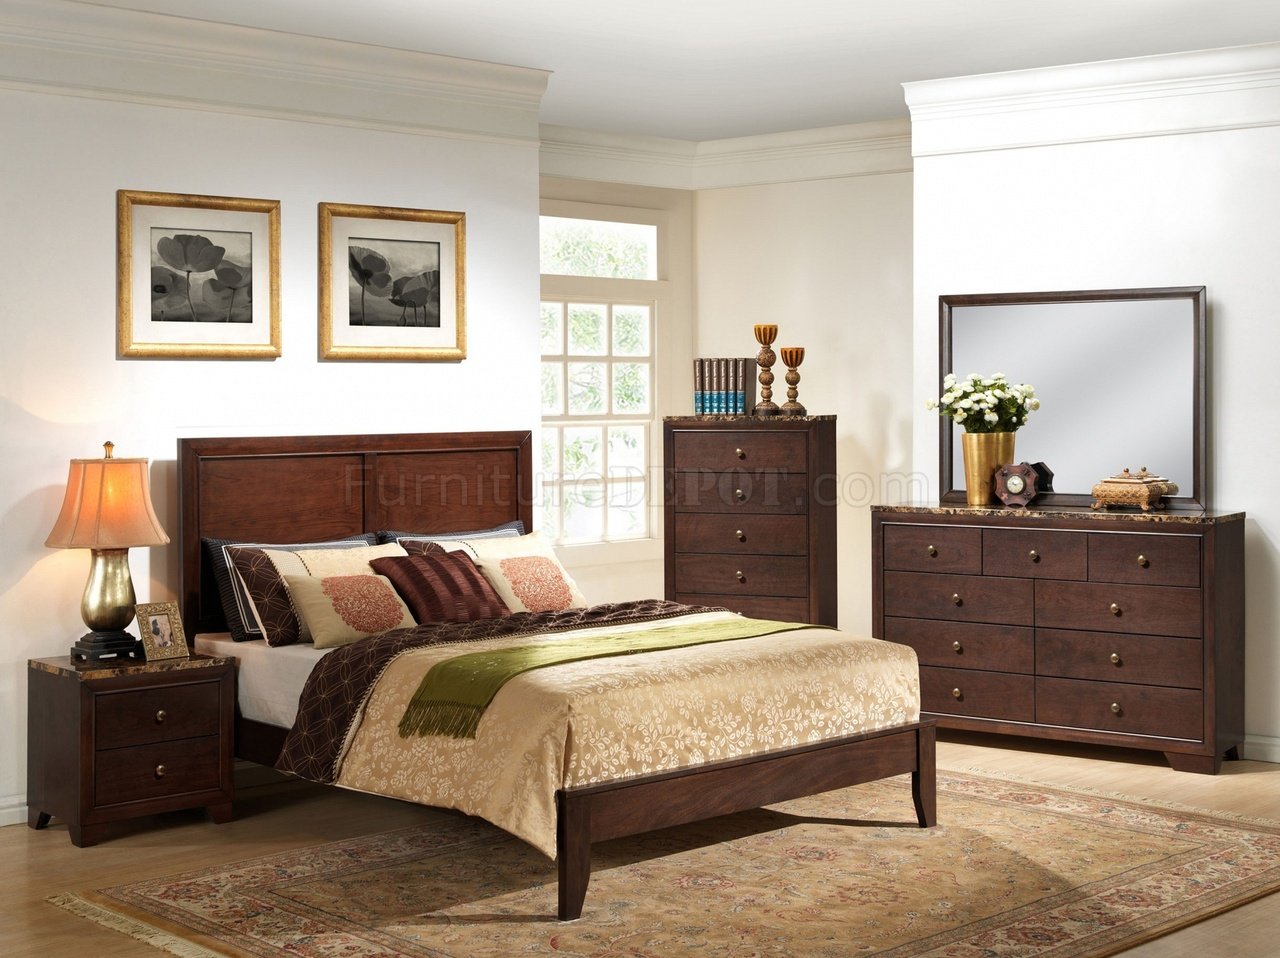 B205 Bedroom Set In Cherry Finish W Faux Marble Top Casegoods